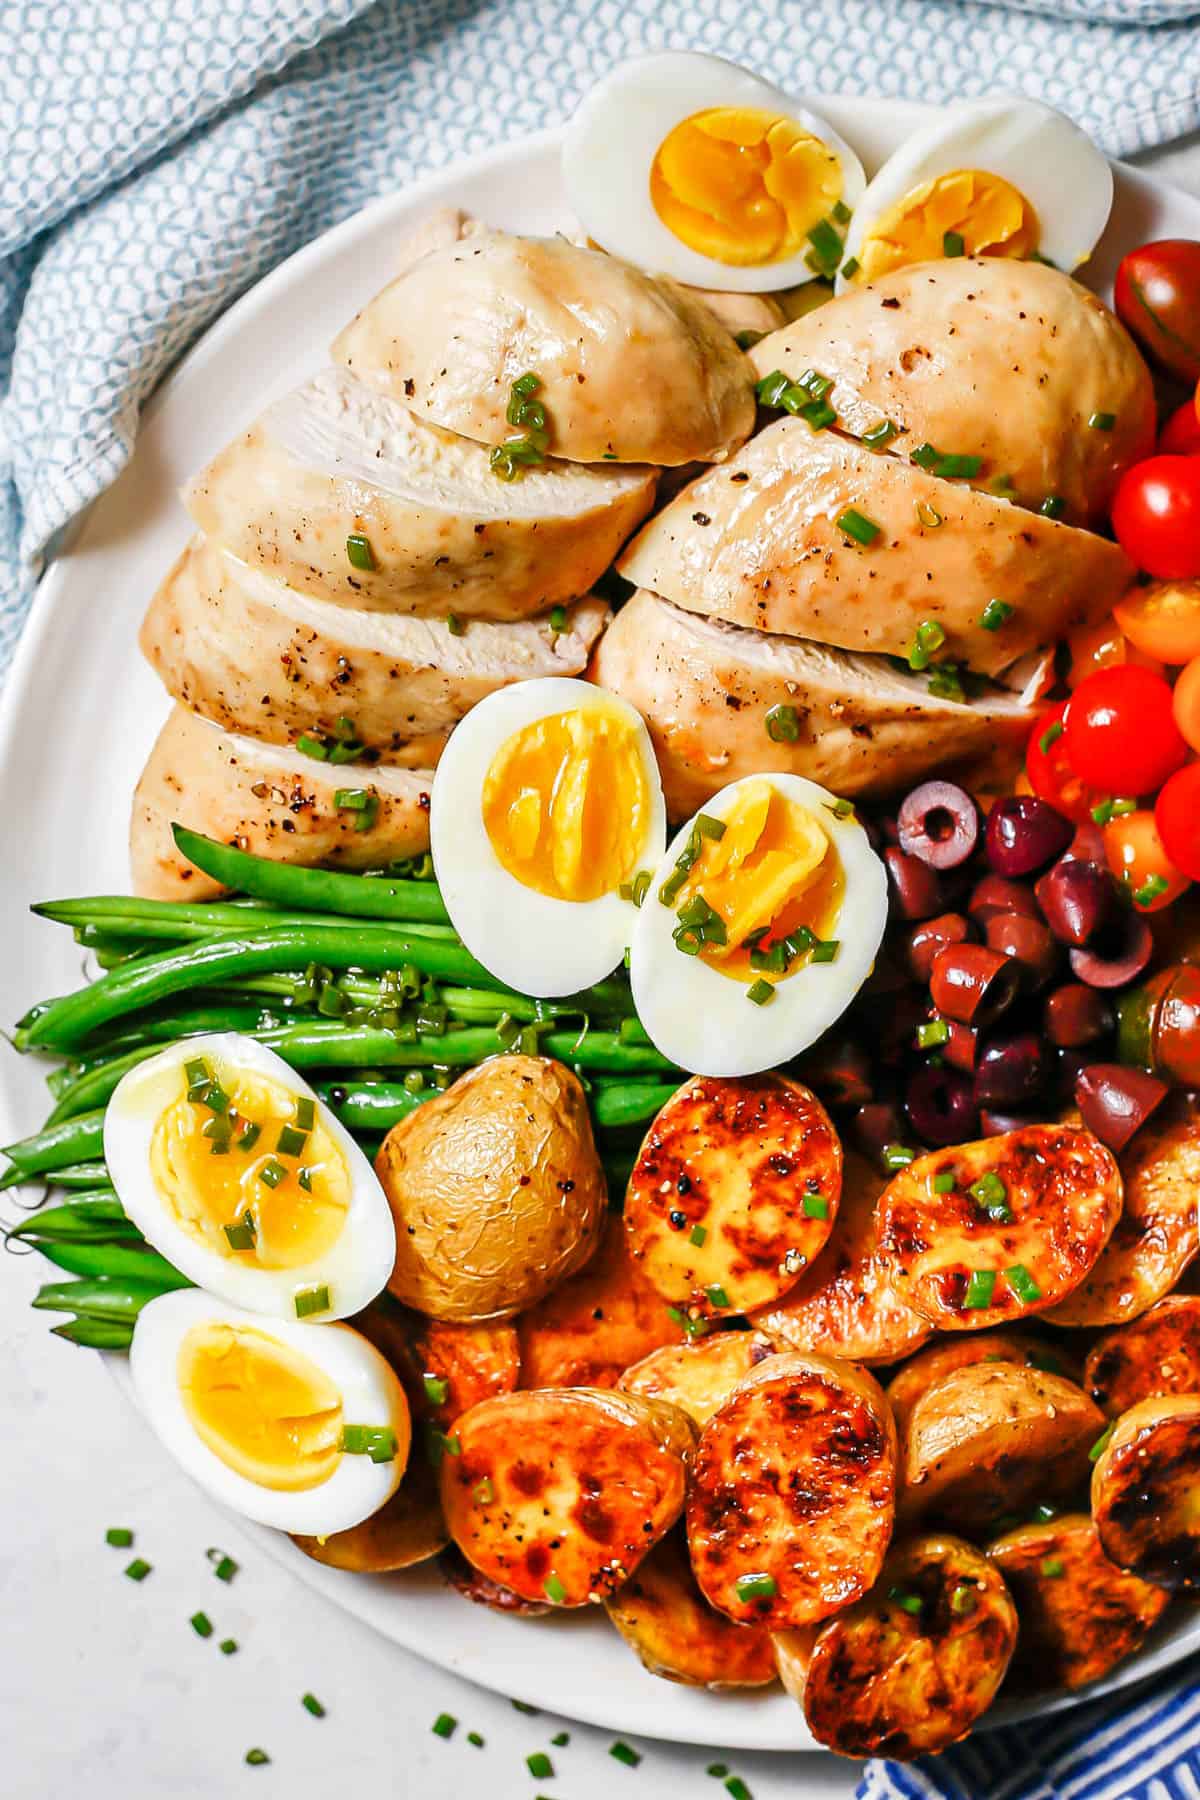 Sliced chicken breasts, hard boiled eggs, haricots verts and roasted potatoes on a white round serving plate.